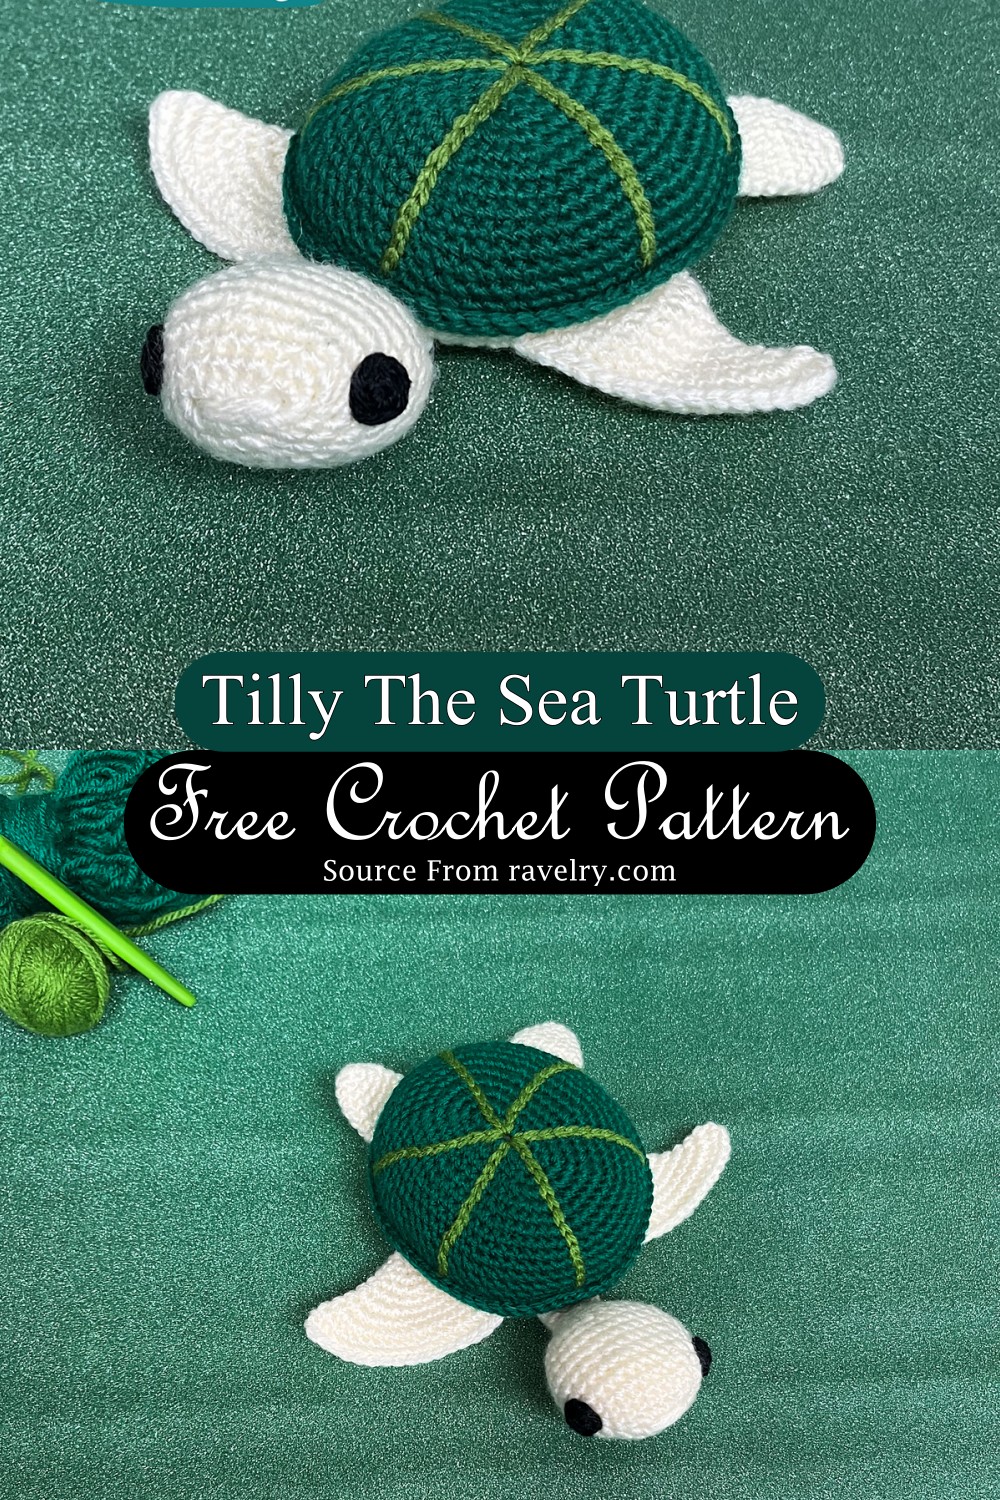 Tilly The Sea Turtle